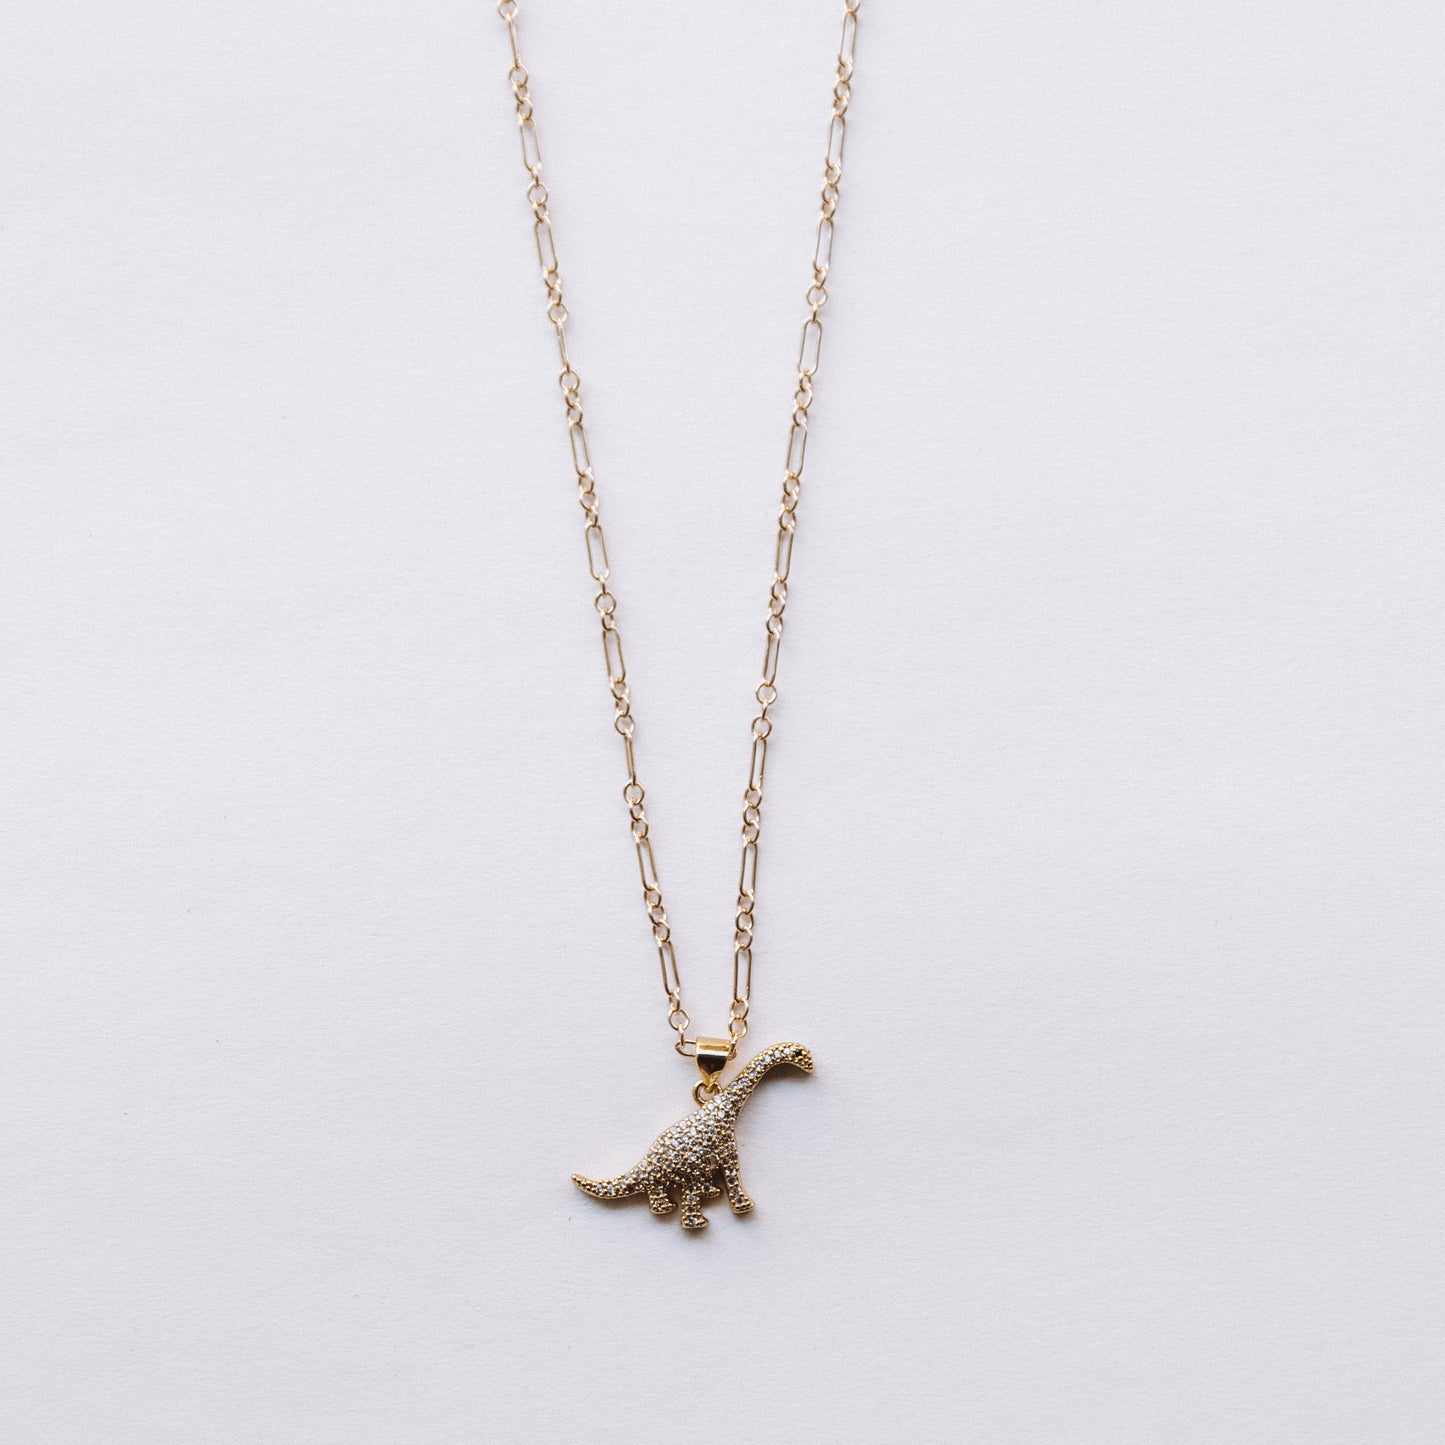 The Dino Necklace